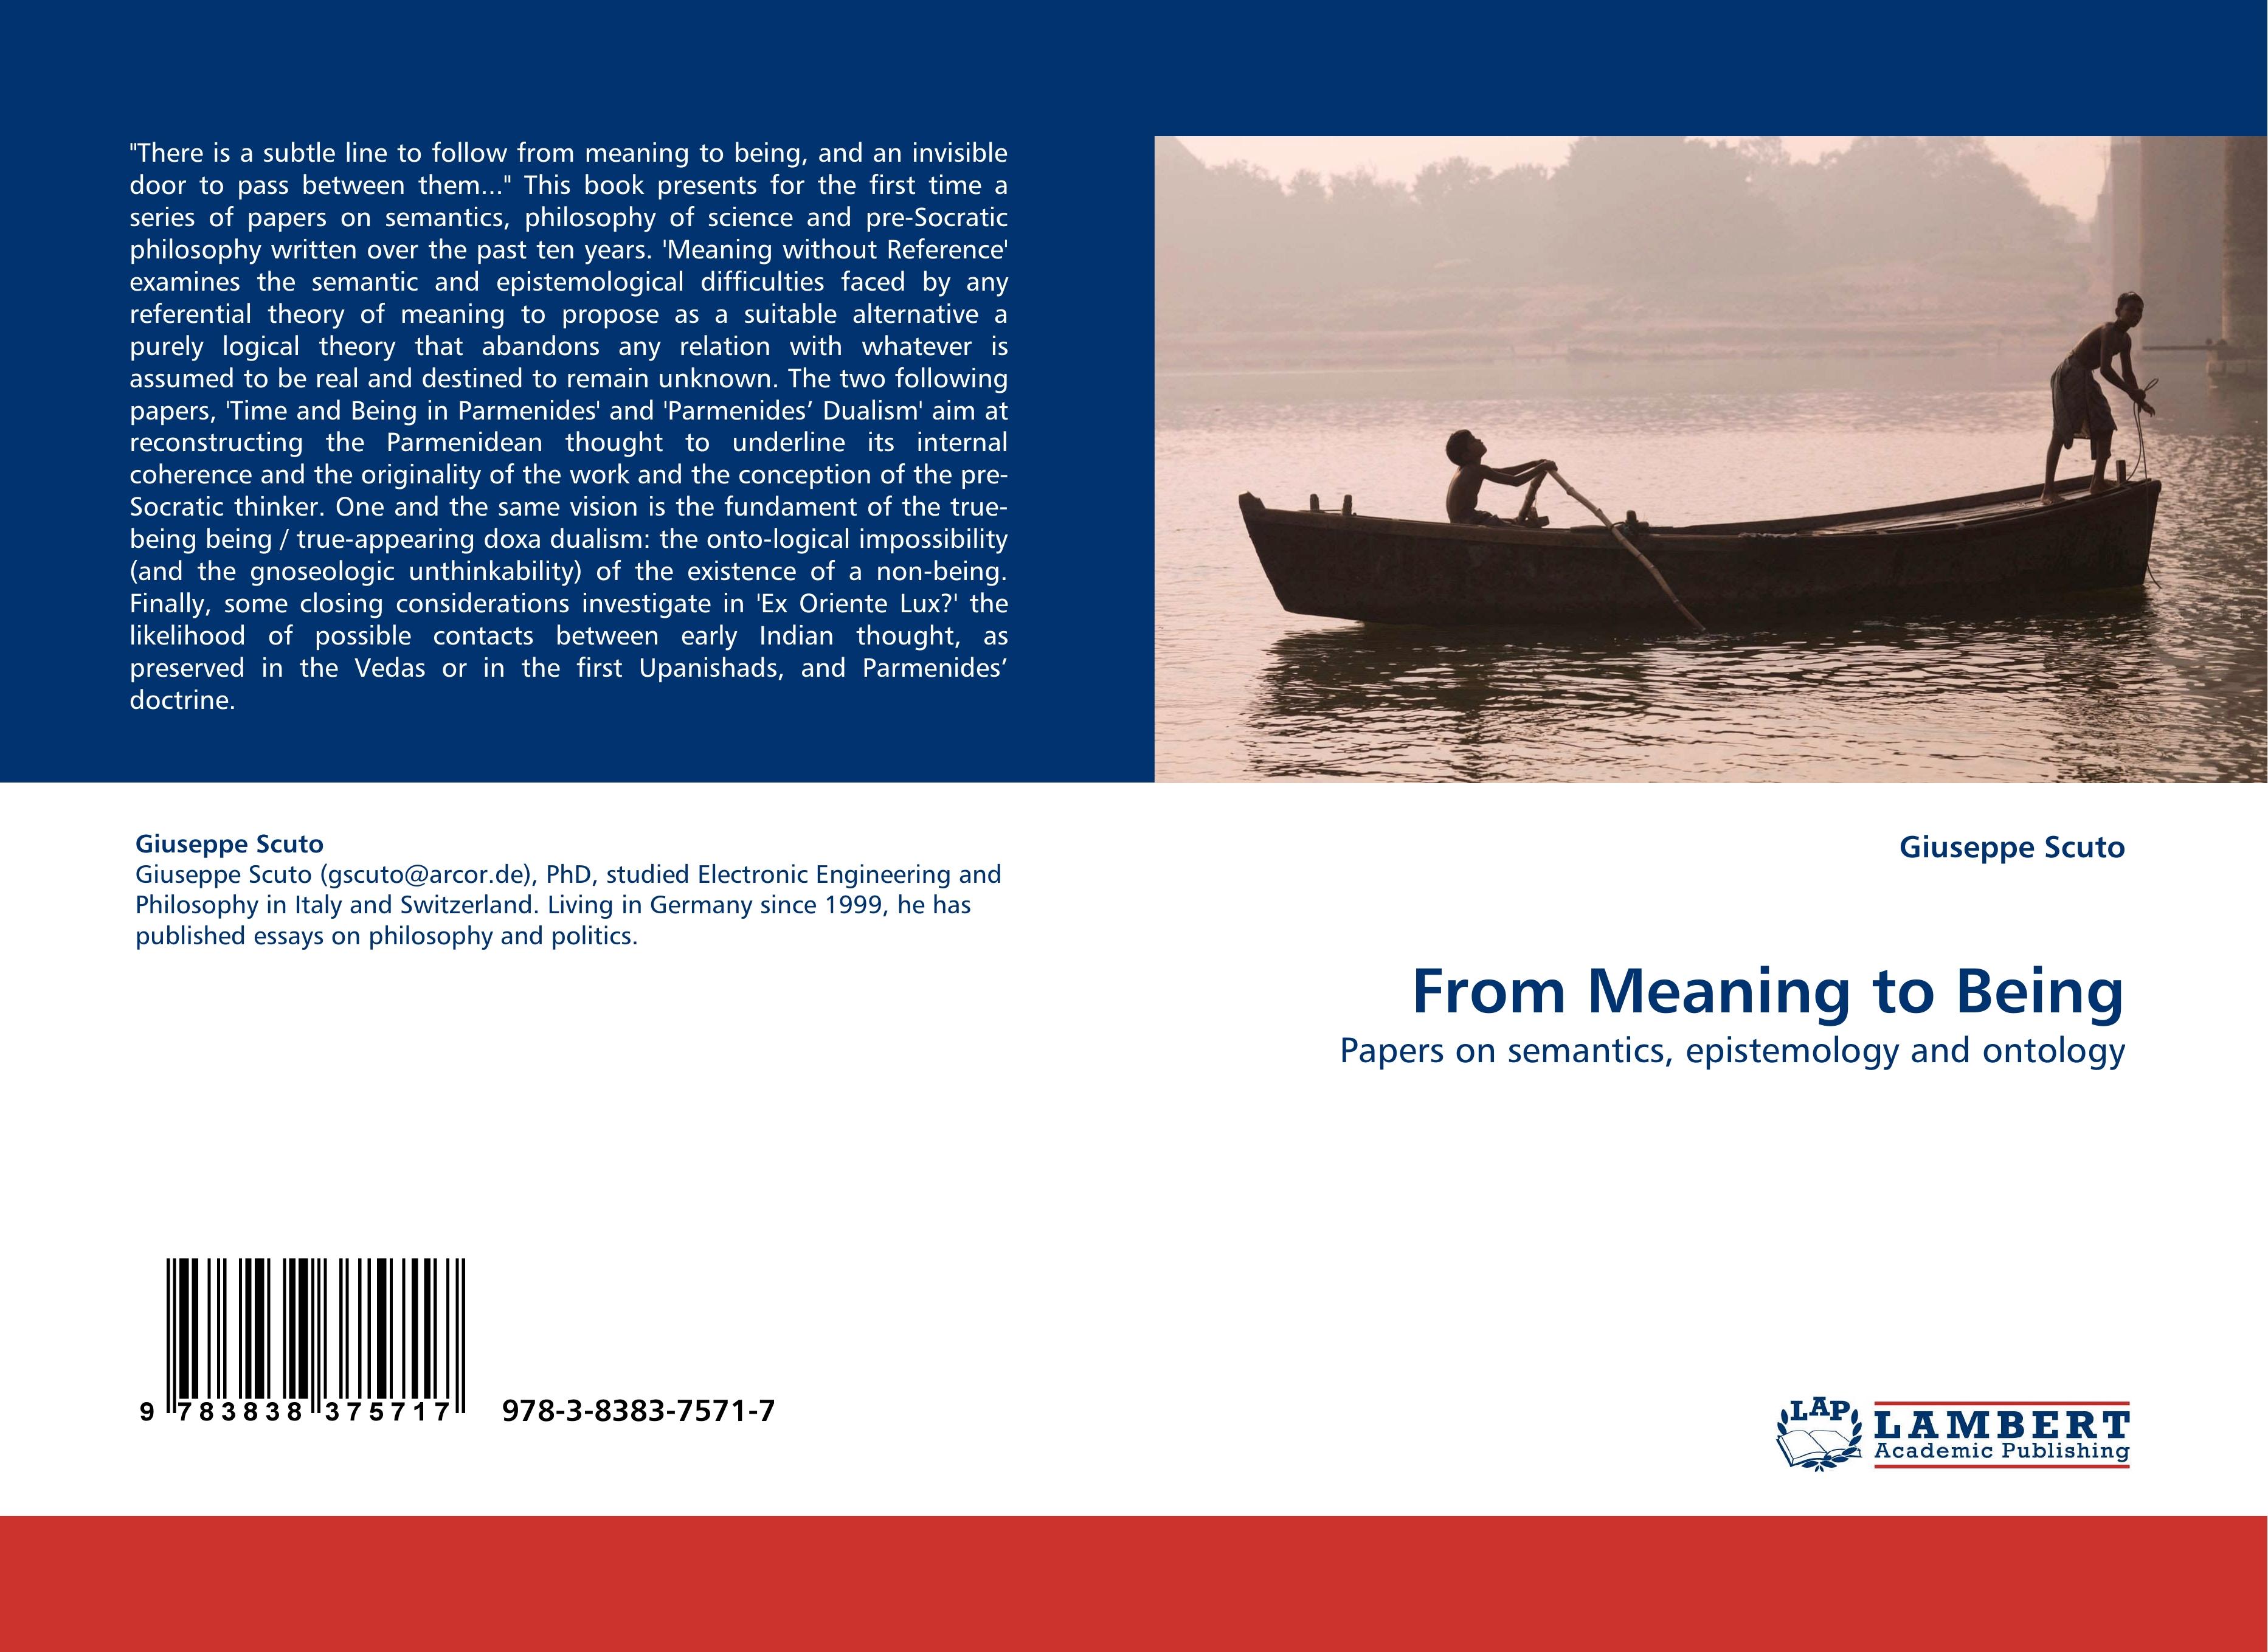 From Meaning to Being | Papers on semantics, epistemology and ontology | Giuseppe Scuto | Taschenbuch | Paperback | 96 S. | Englisch | 2010 | LAP LAMBERT Academic Publishing | EAN 9783838375717 - Scuto, Giuseppe